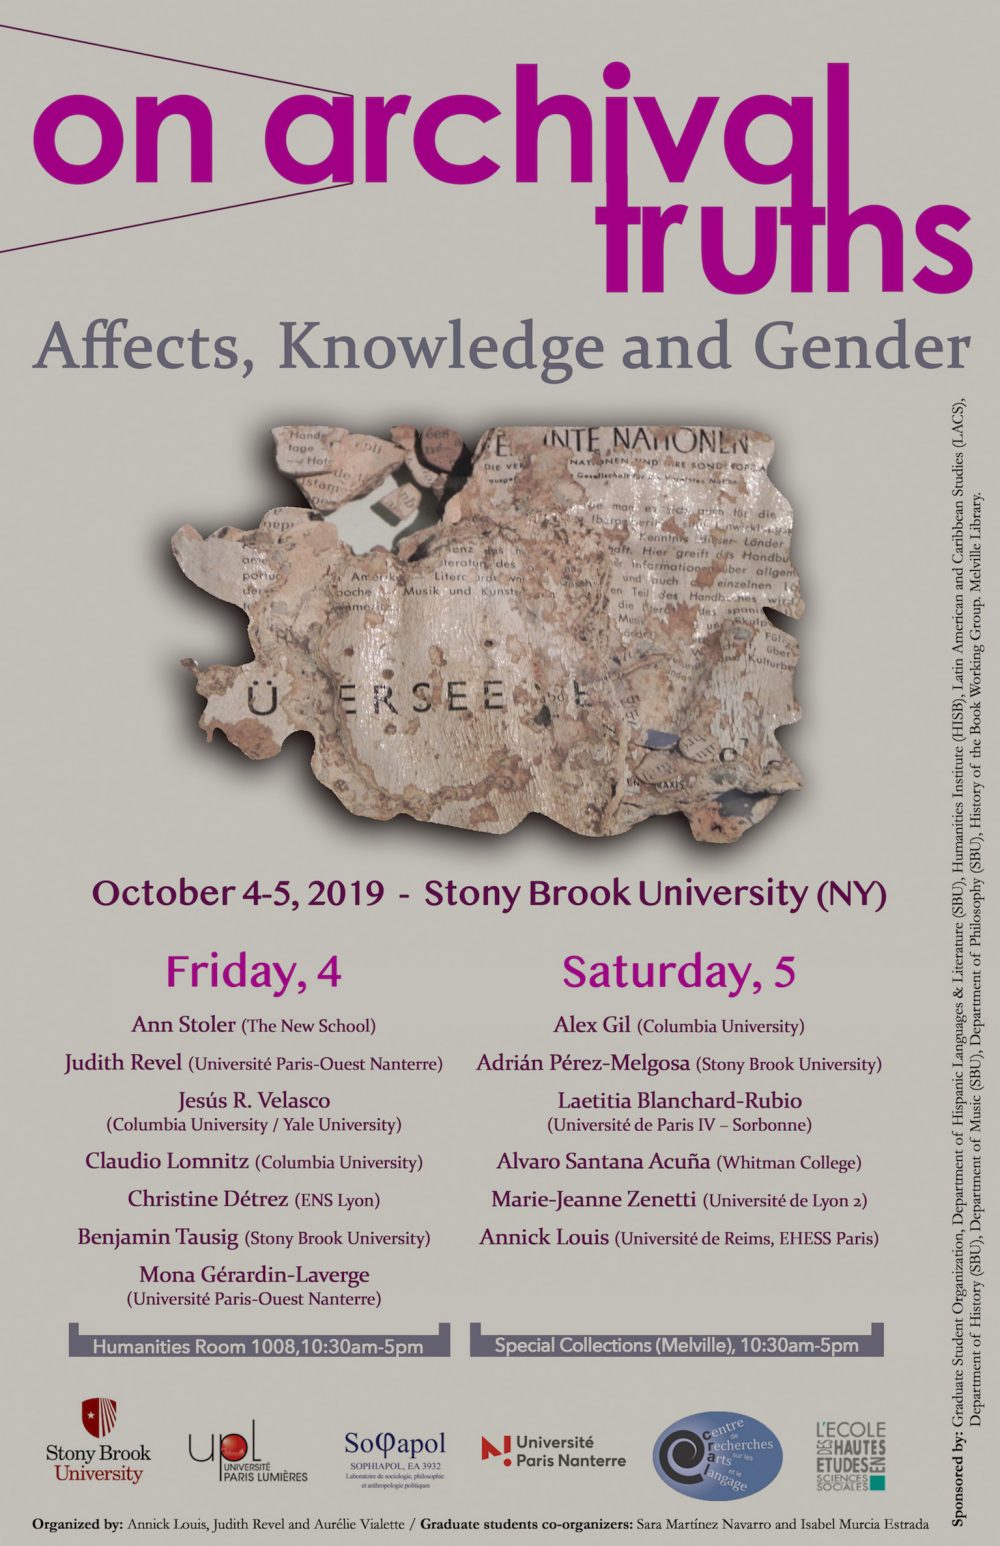 Poster for "On Archival Truths: Affects, Knowledge and Gender" conference